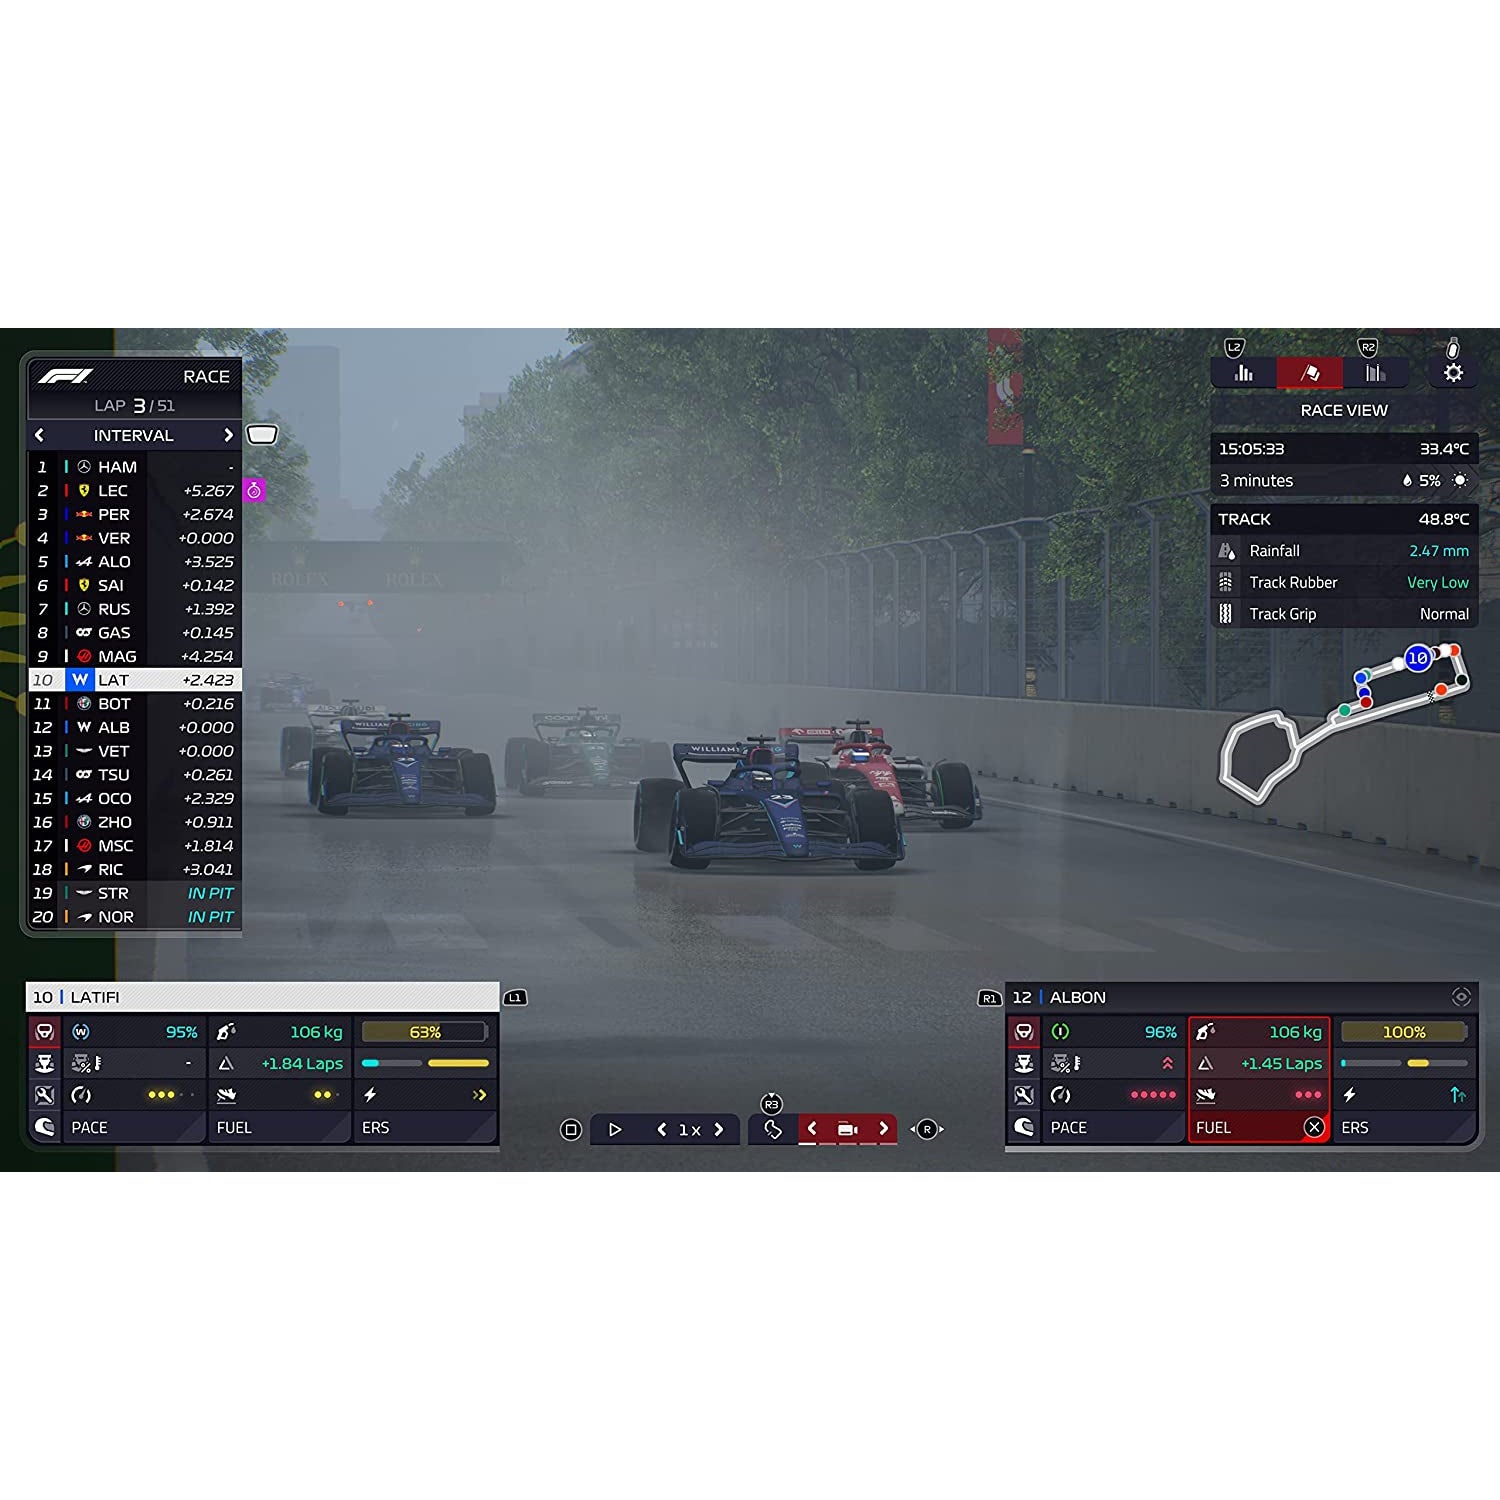 F1 Manager 22 (PS5)